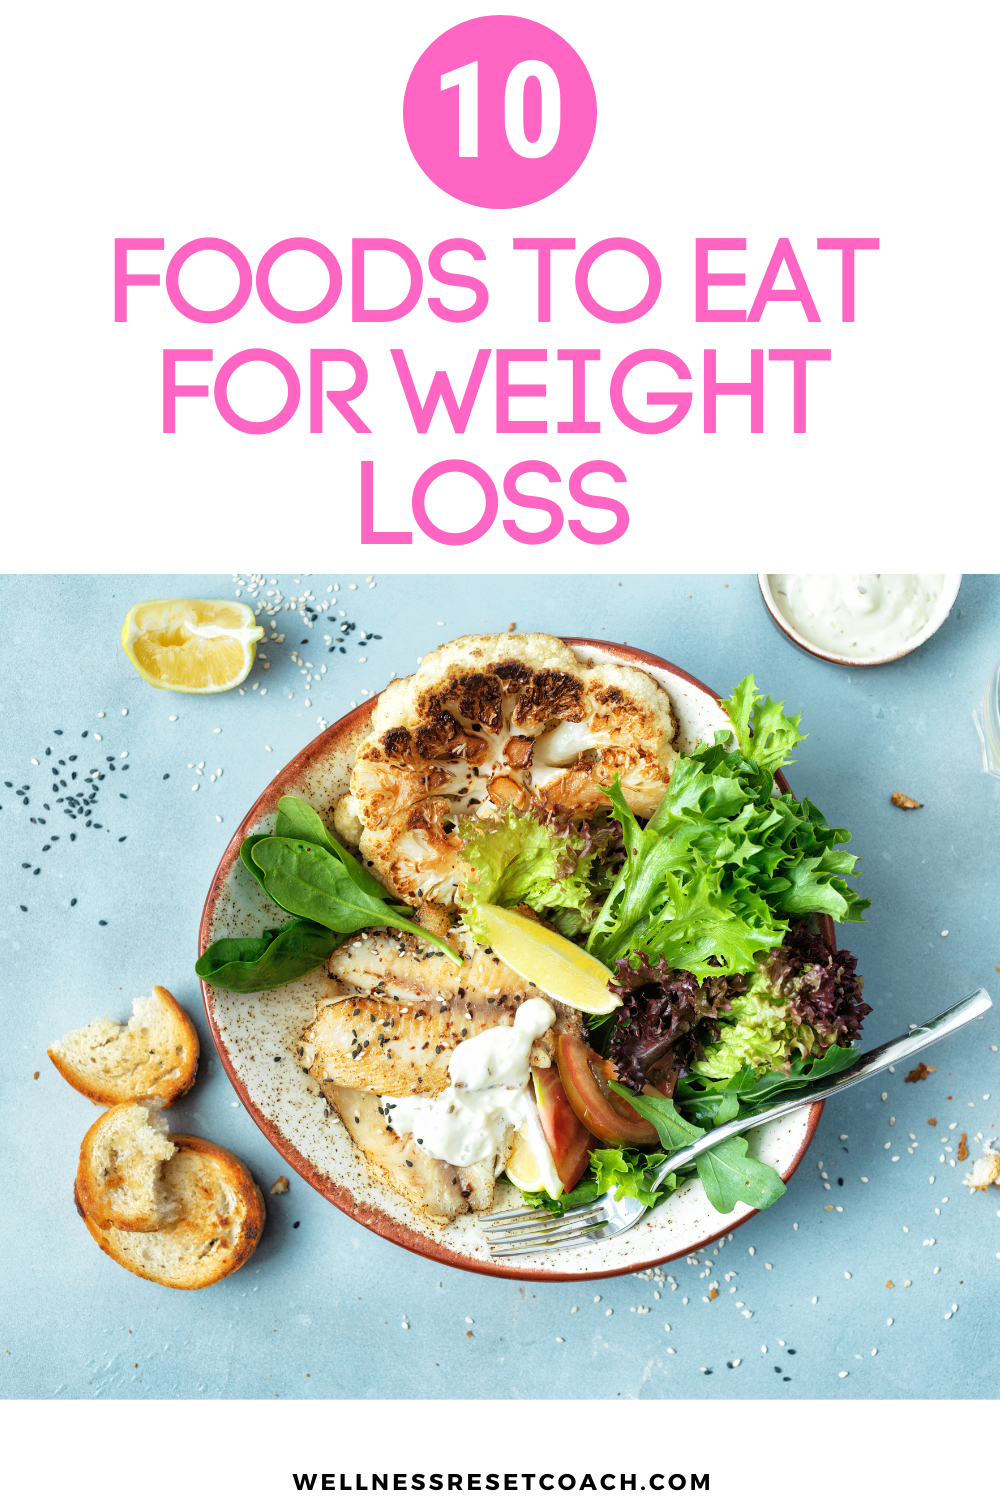 Foods To Eat For Rapid Weight Loss Wellness Reset